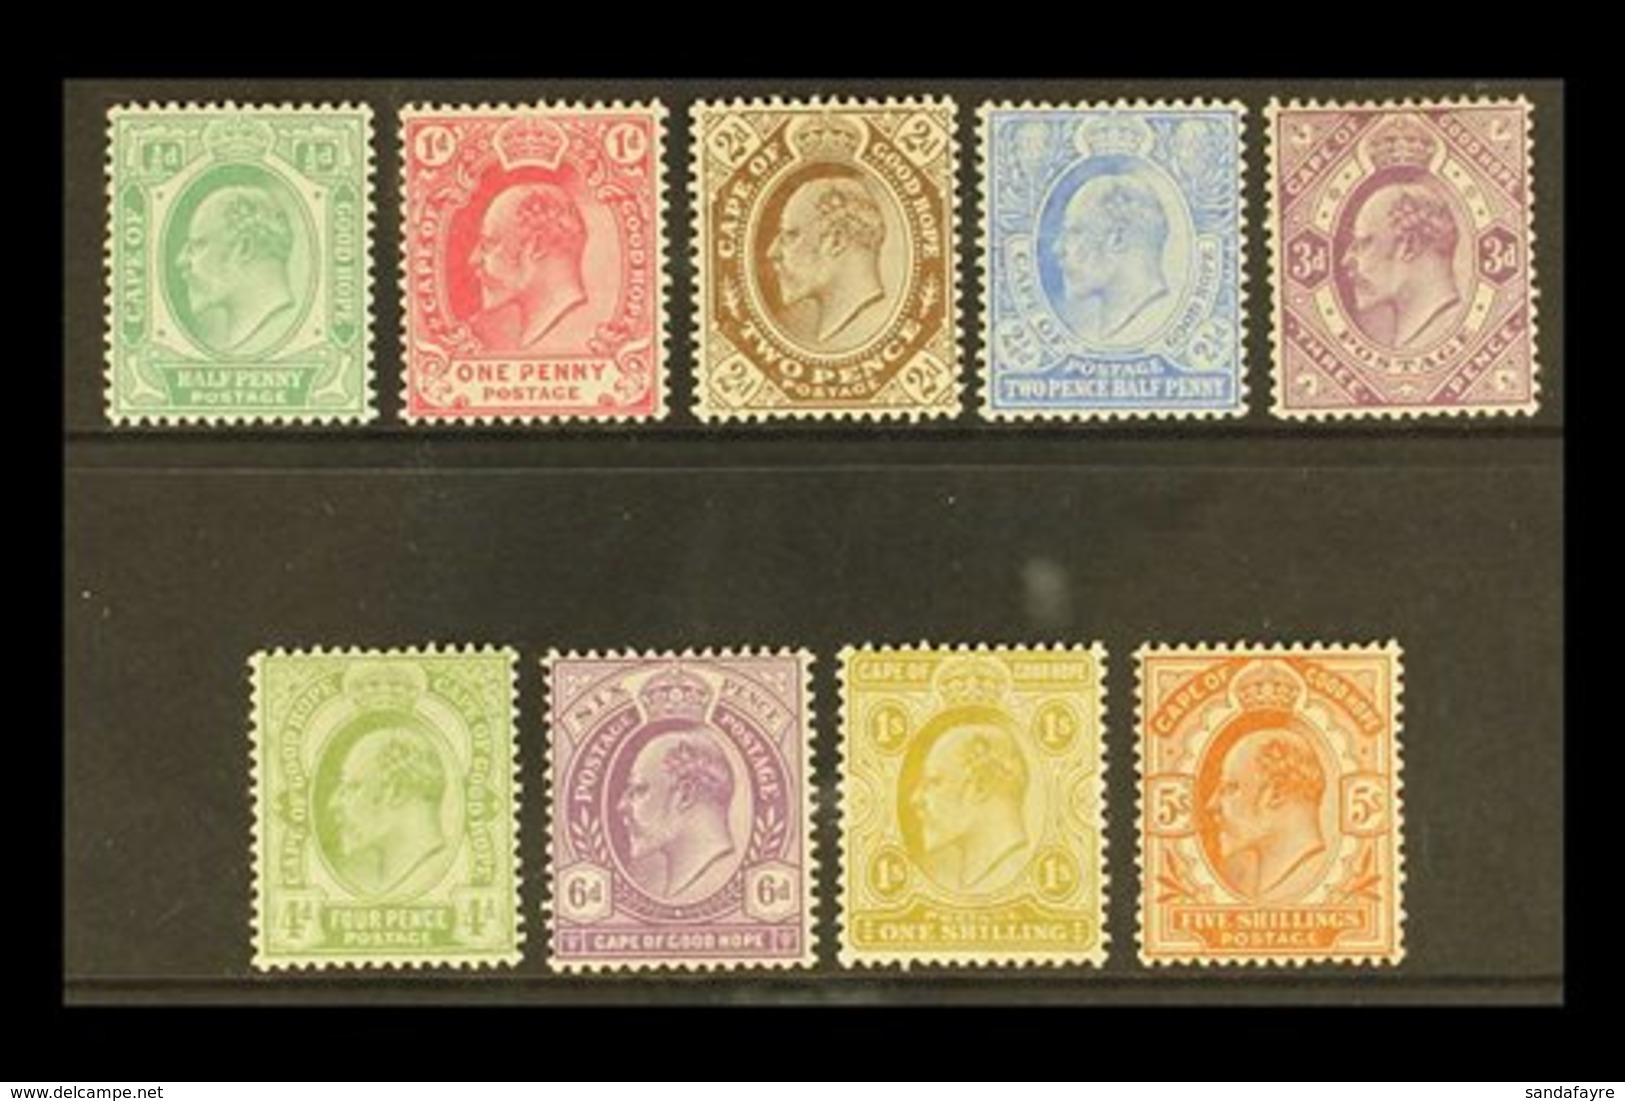 CAPE OF GOOD HOPE 1902-04 KEVII Definitives, Complete Set, SG 70/8, 3d More Heavily Hinged, Others Fine Mint (9 Stamps). - Non Classés